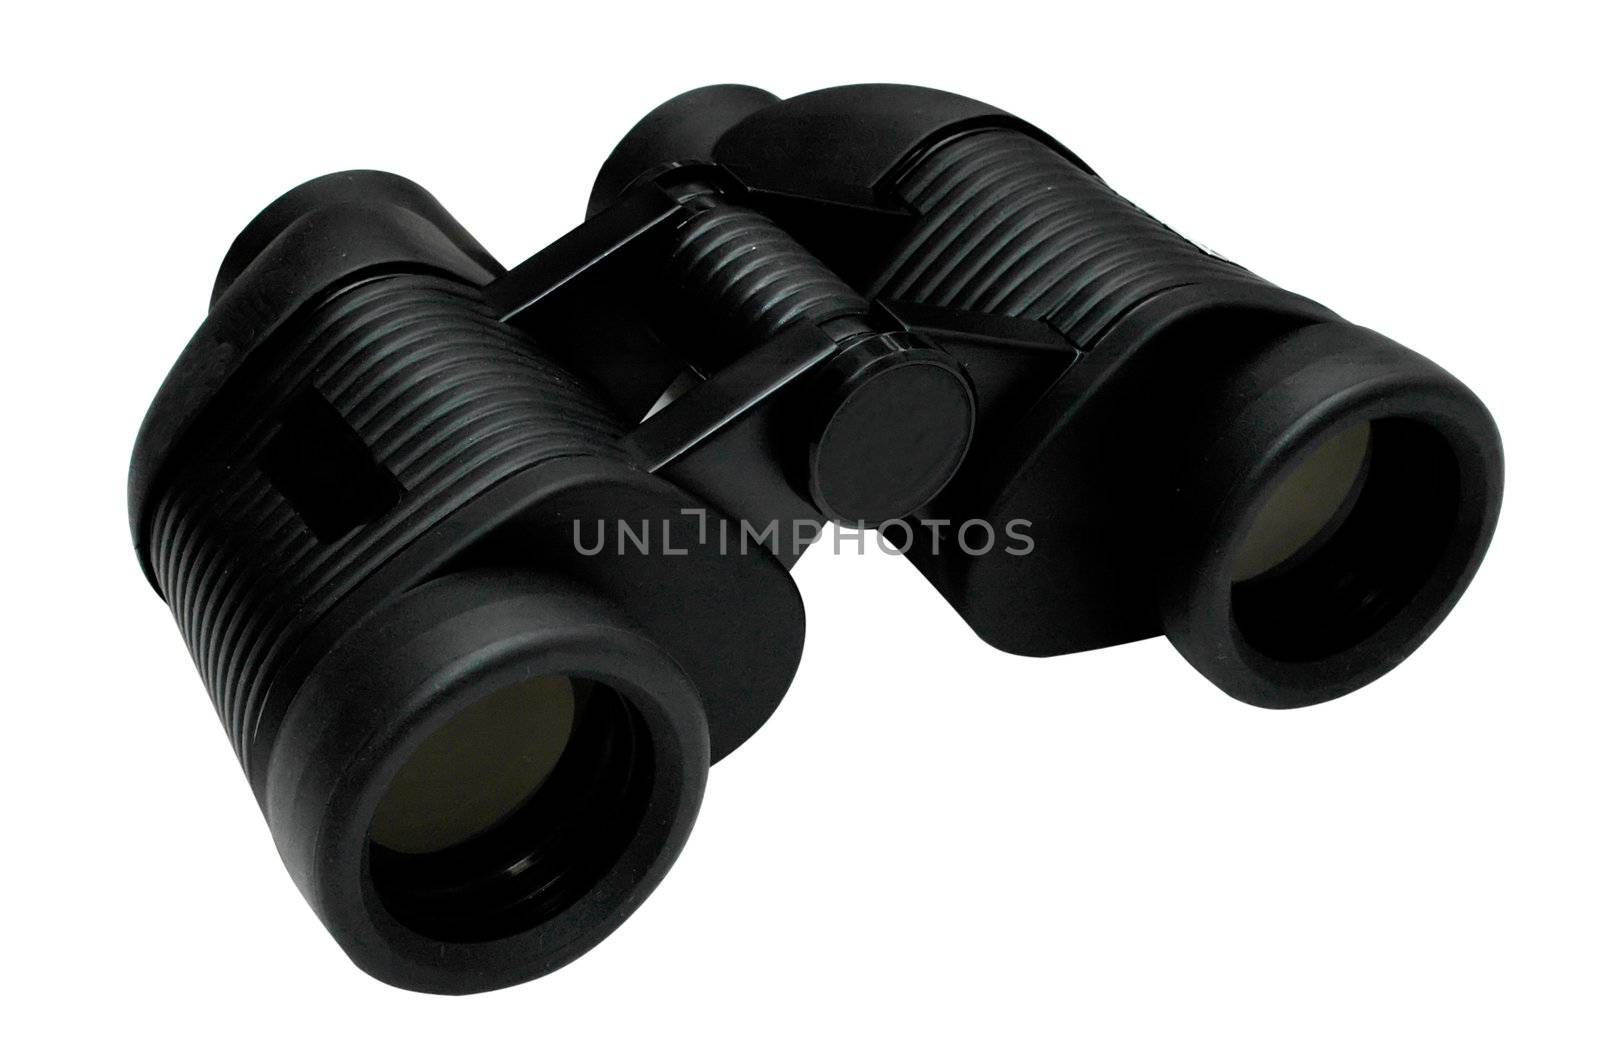 Binoculars.  Isolated with clipping path